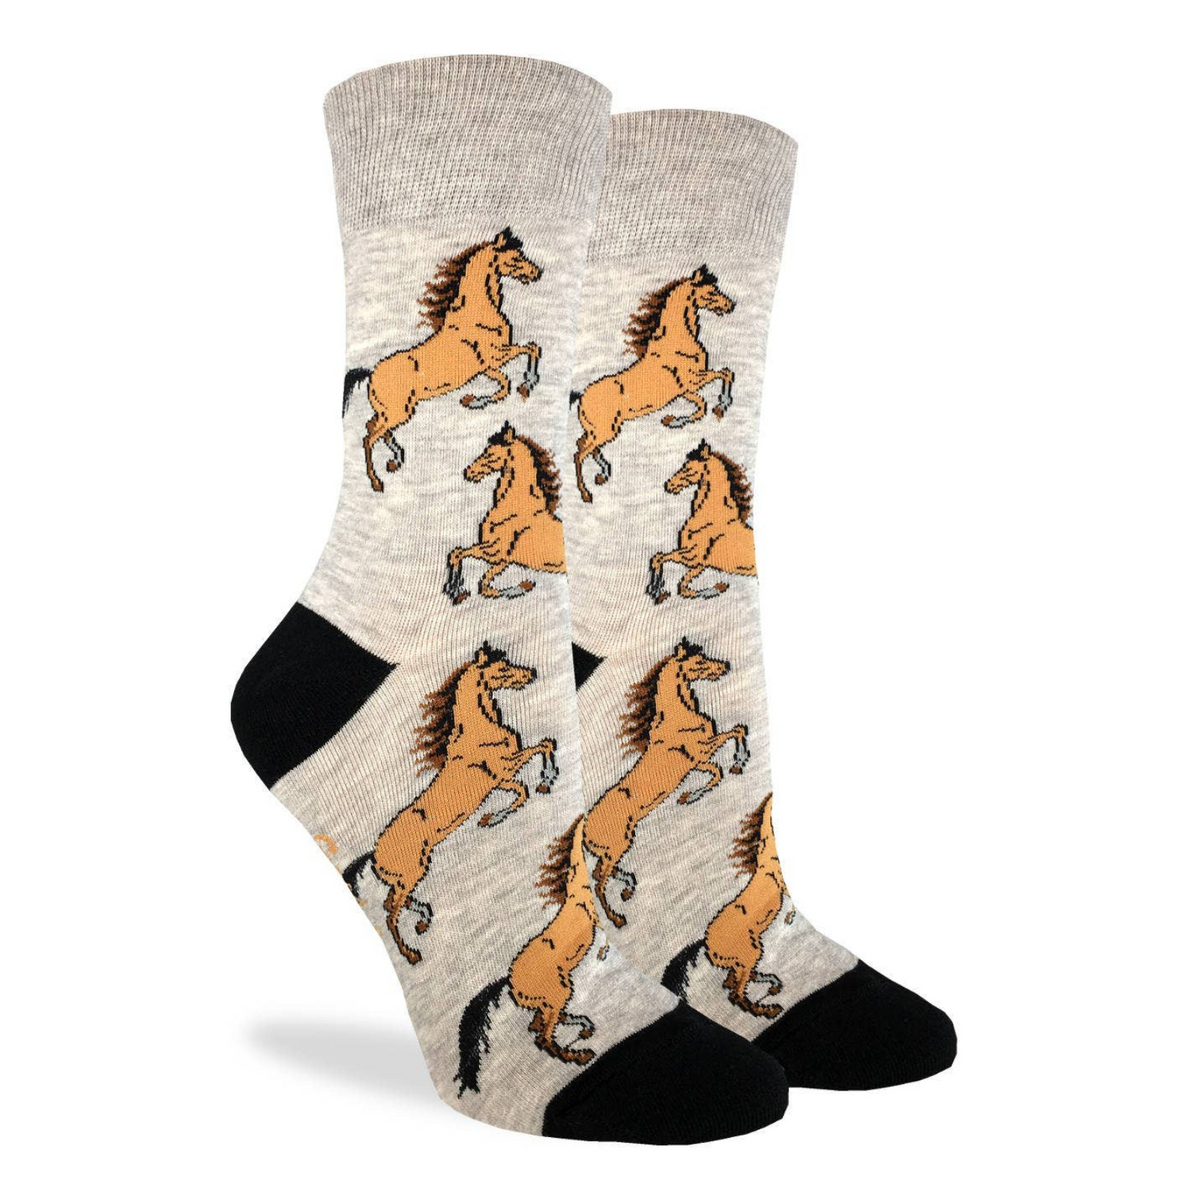 Good Luck Sock women&#39;s gray crew sock with brown horses all over on display feet